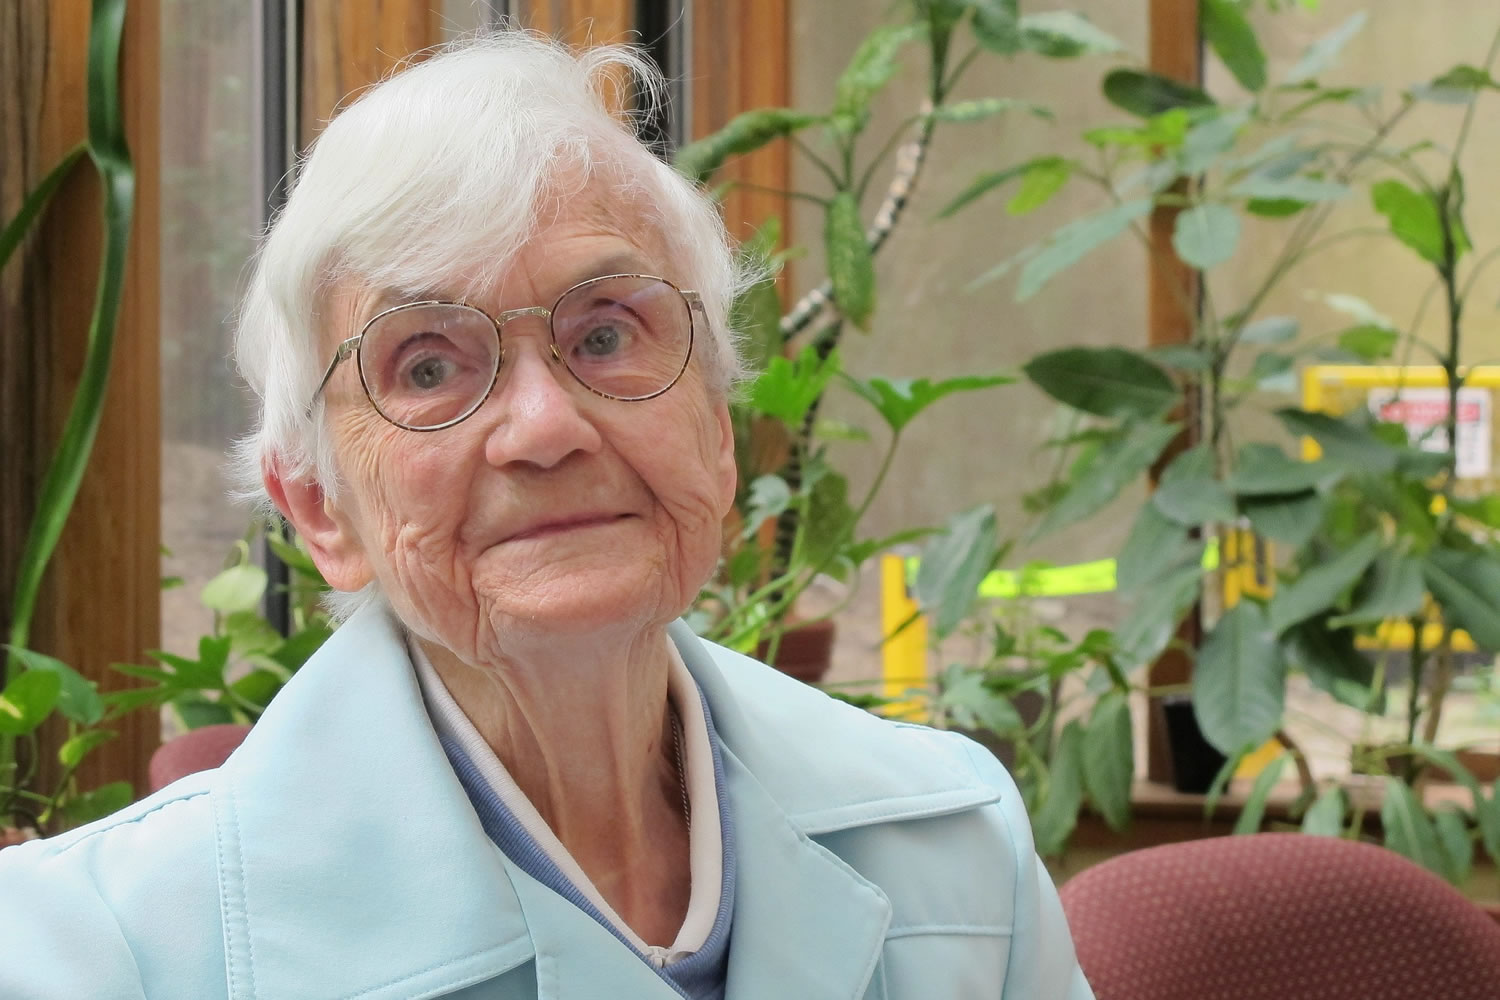 Sister Angela Rooney, 98, a Roman Catholic nun, discusses the decision her order made to close its infirmary and send her and other nuns to Jewish Home Lifecare in the Bronx borough of New York.